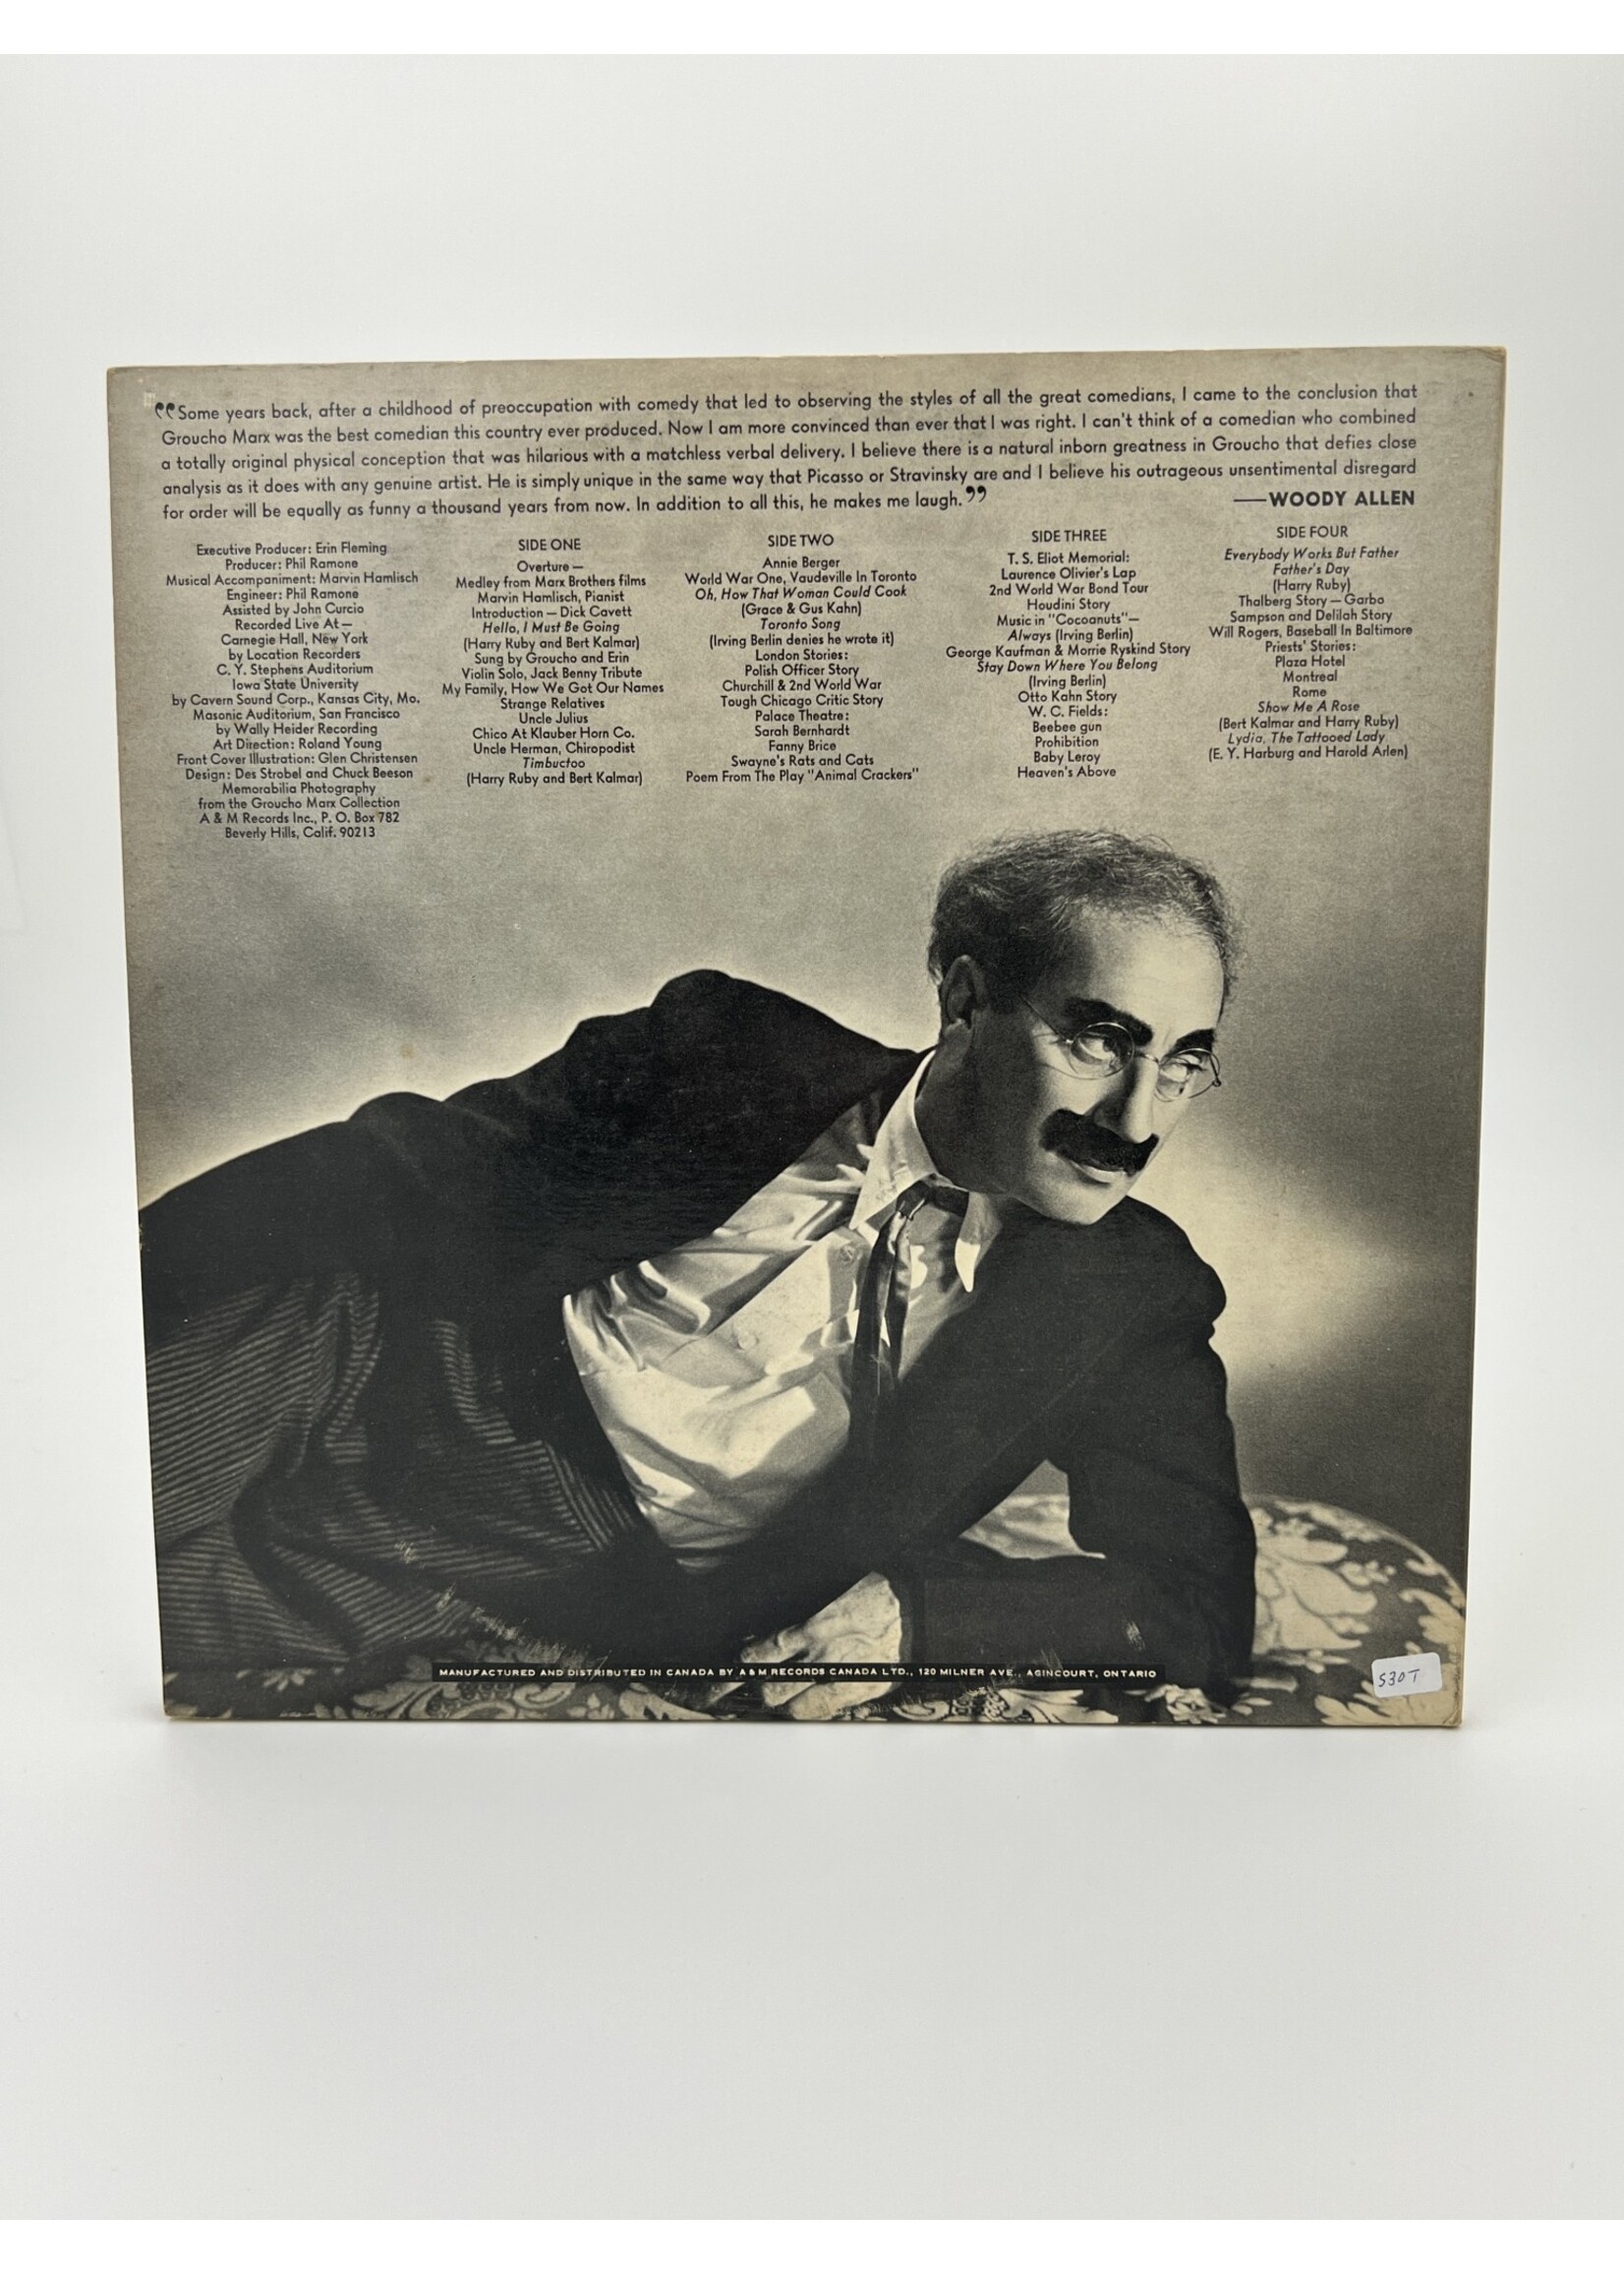 LP   An Evening With Groucho 2 LP Record